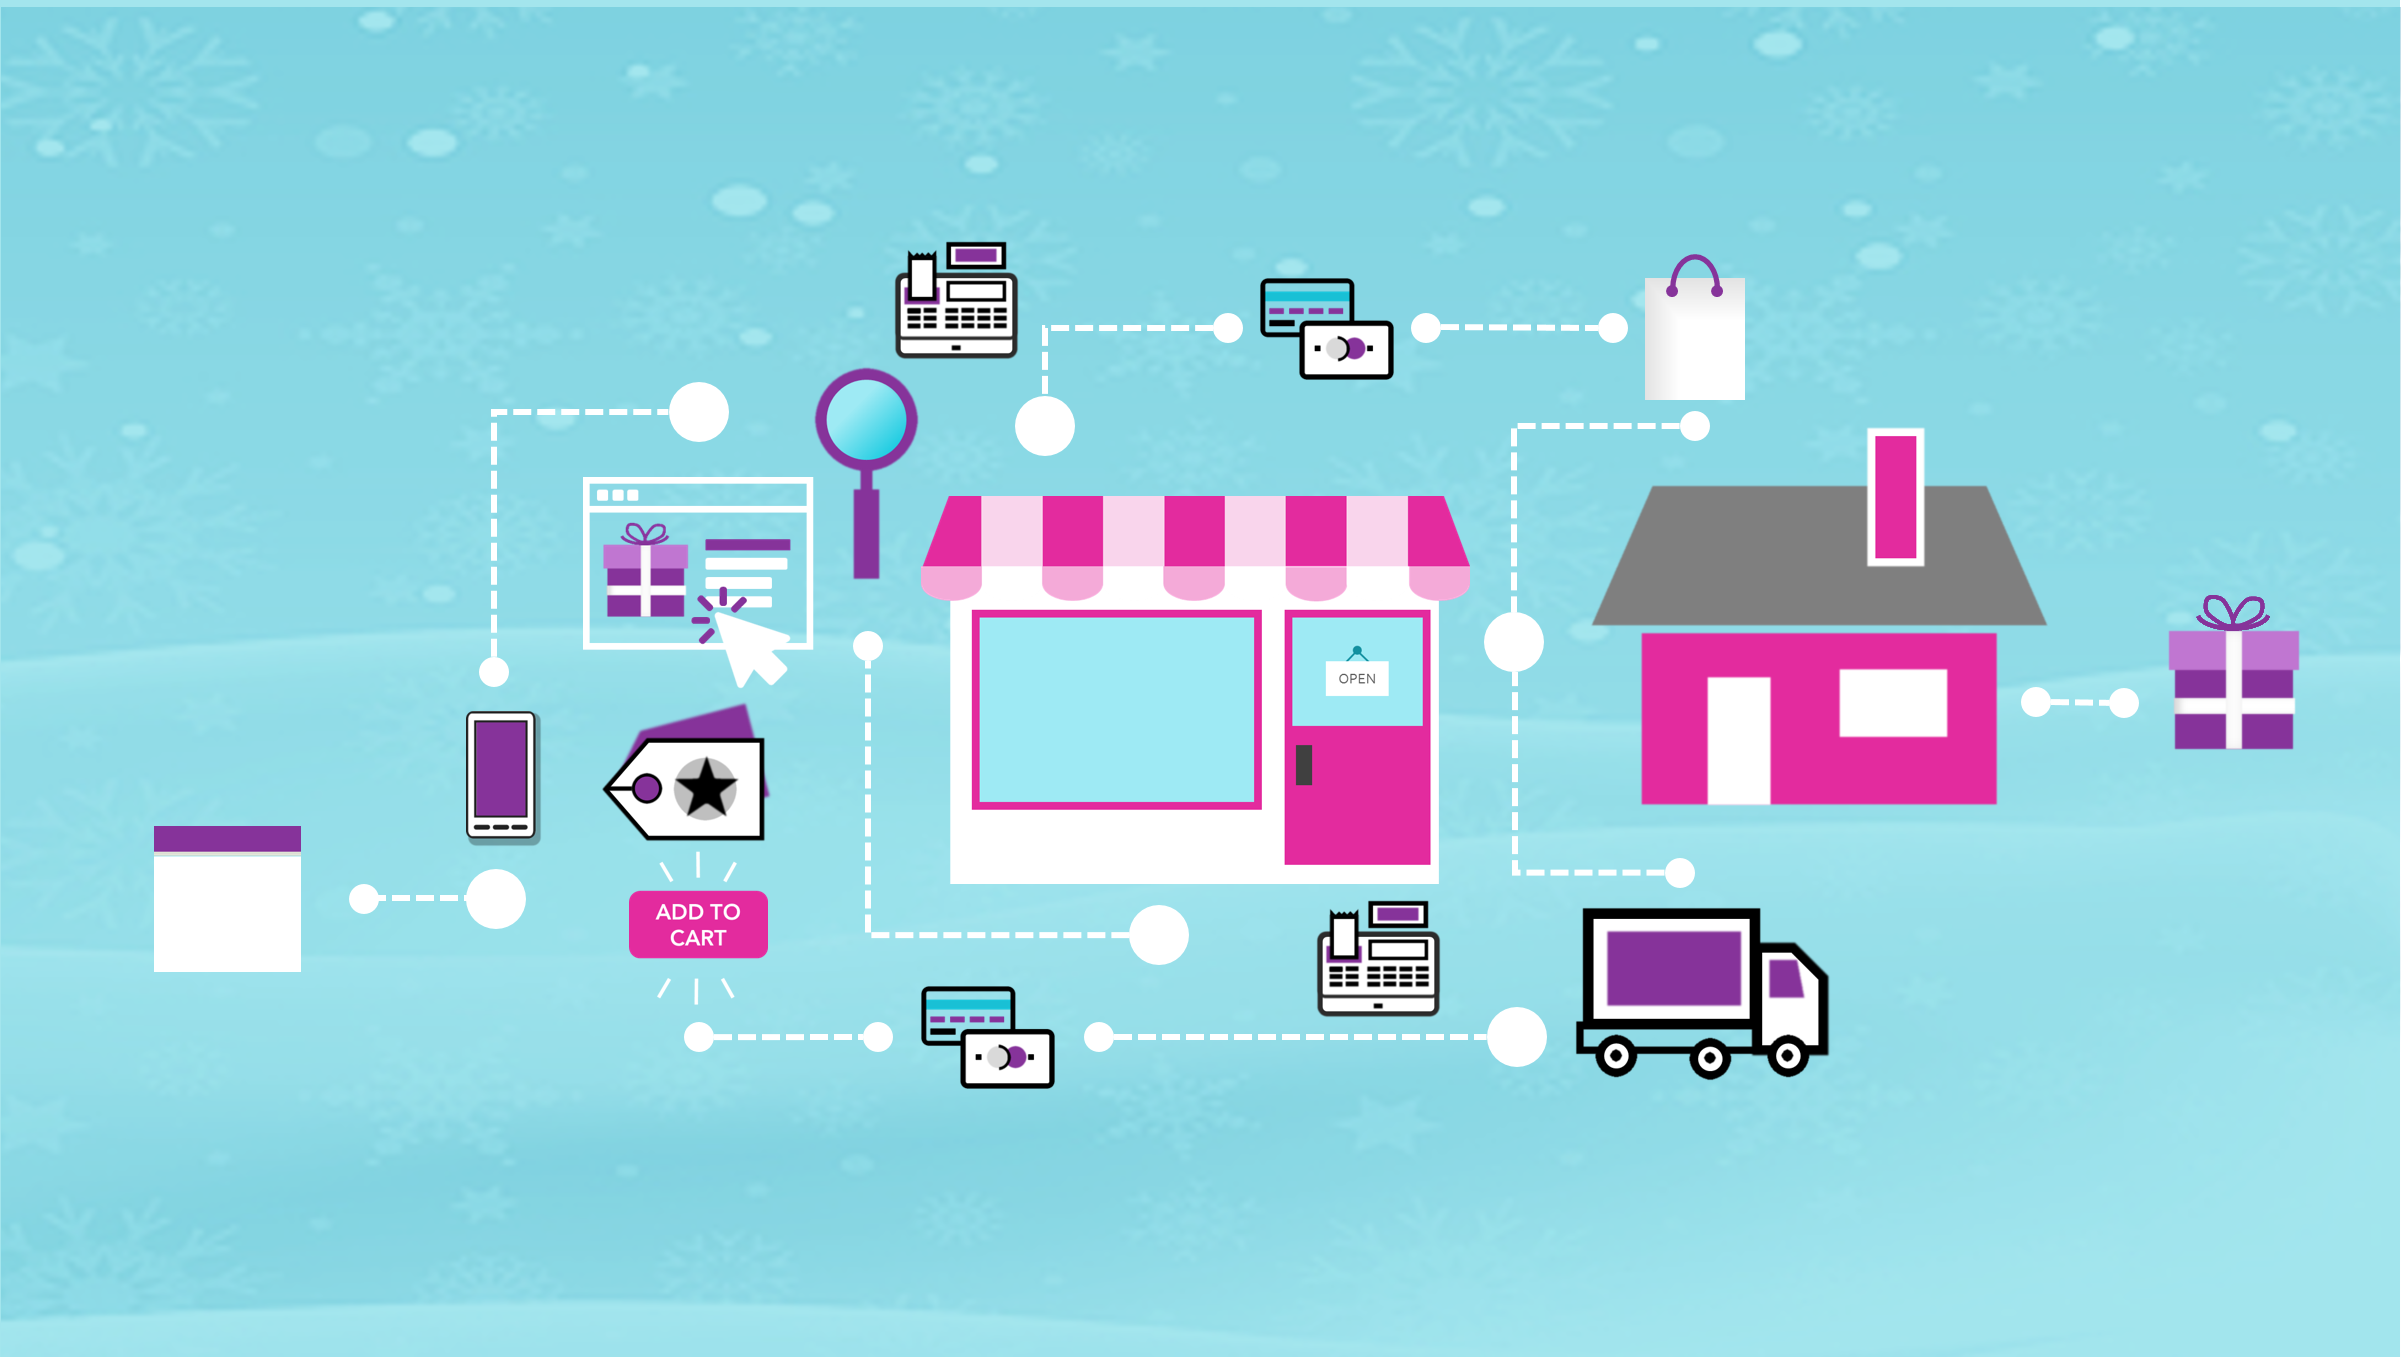 [Guide]: 6 tips to unwrap the holiday season consumer buying journey